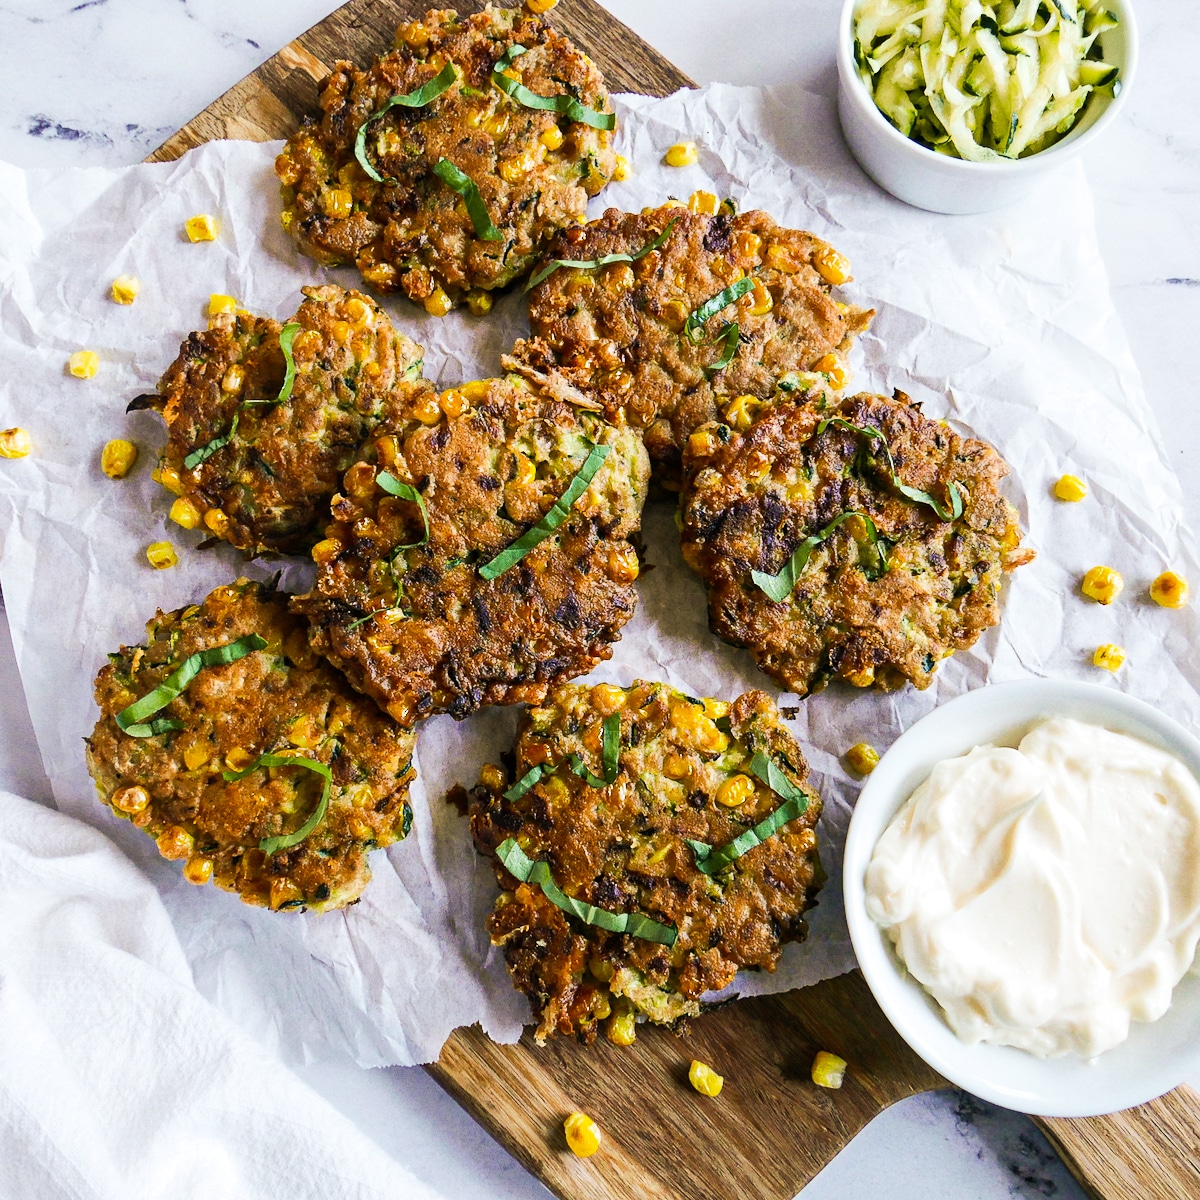 Zucchini and corn fritters arranged on parchment paper with a cup of sauce.